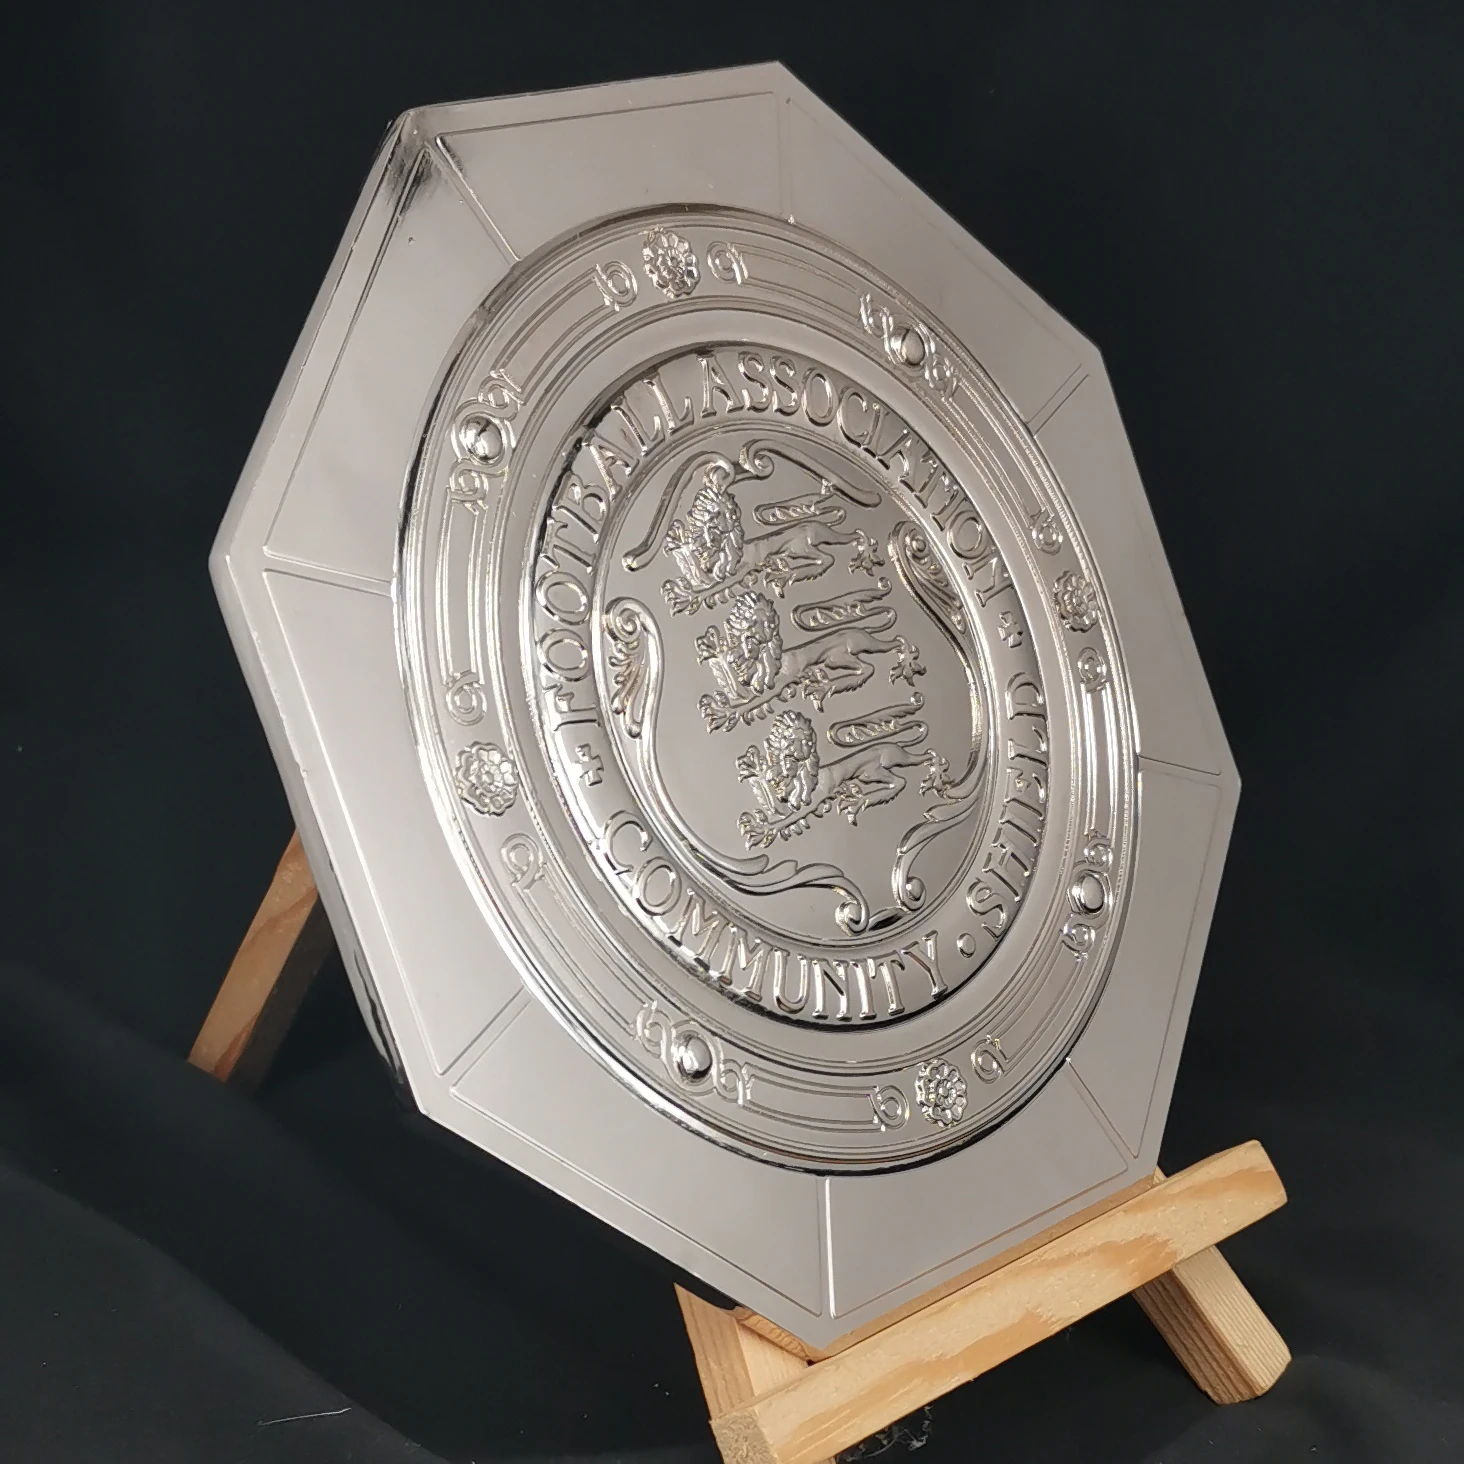 The Football Association Community Shield Trophy Cup 25 Pcs Per Pack Diameter 14 Cm Metal Soccer Trophy For Trophy Collector